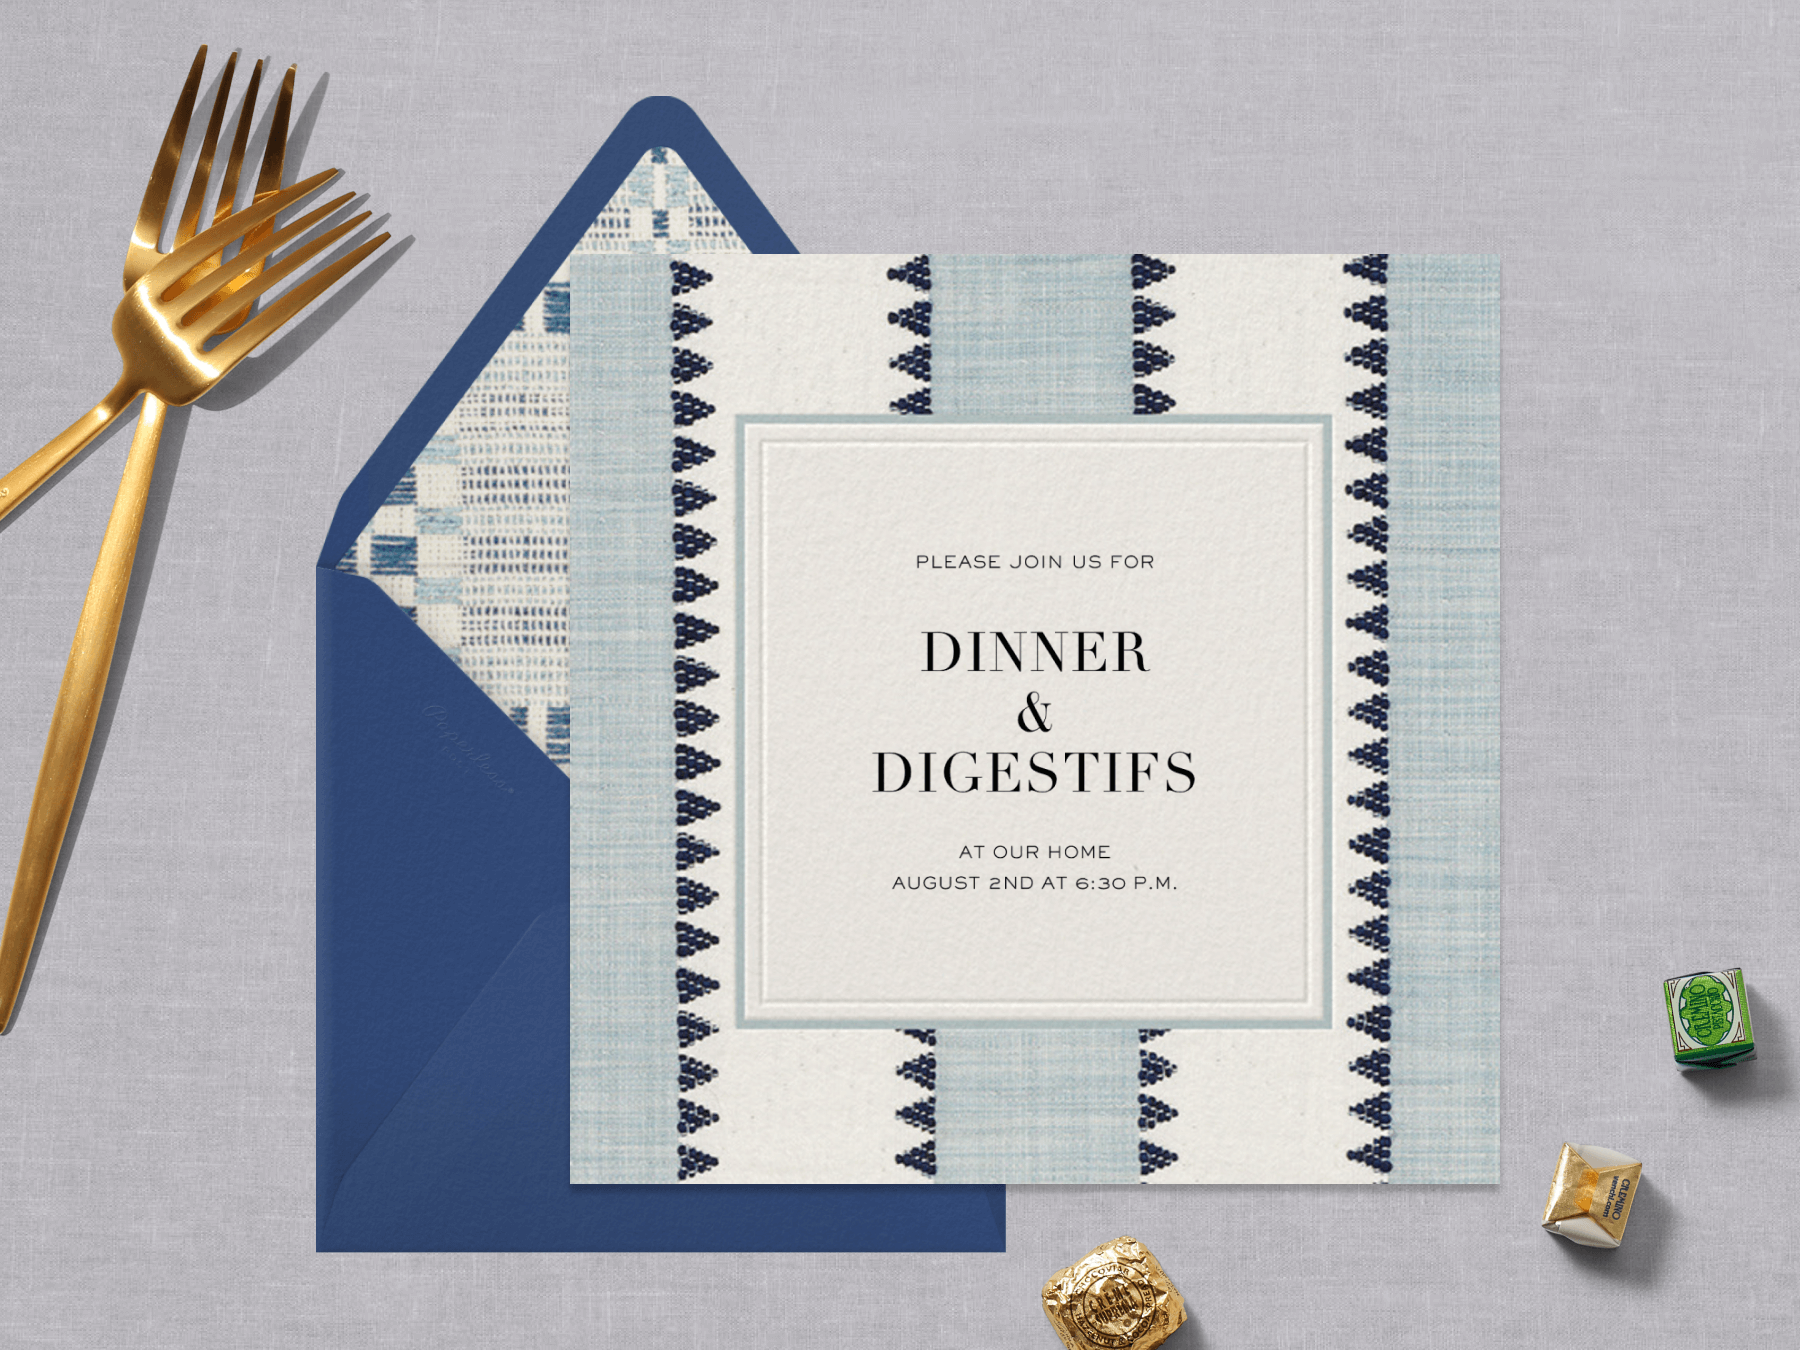 A dinner party invitation with textural light blue and white stripes with black teeth pattern next to gold forks.